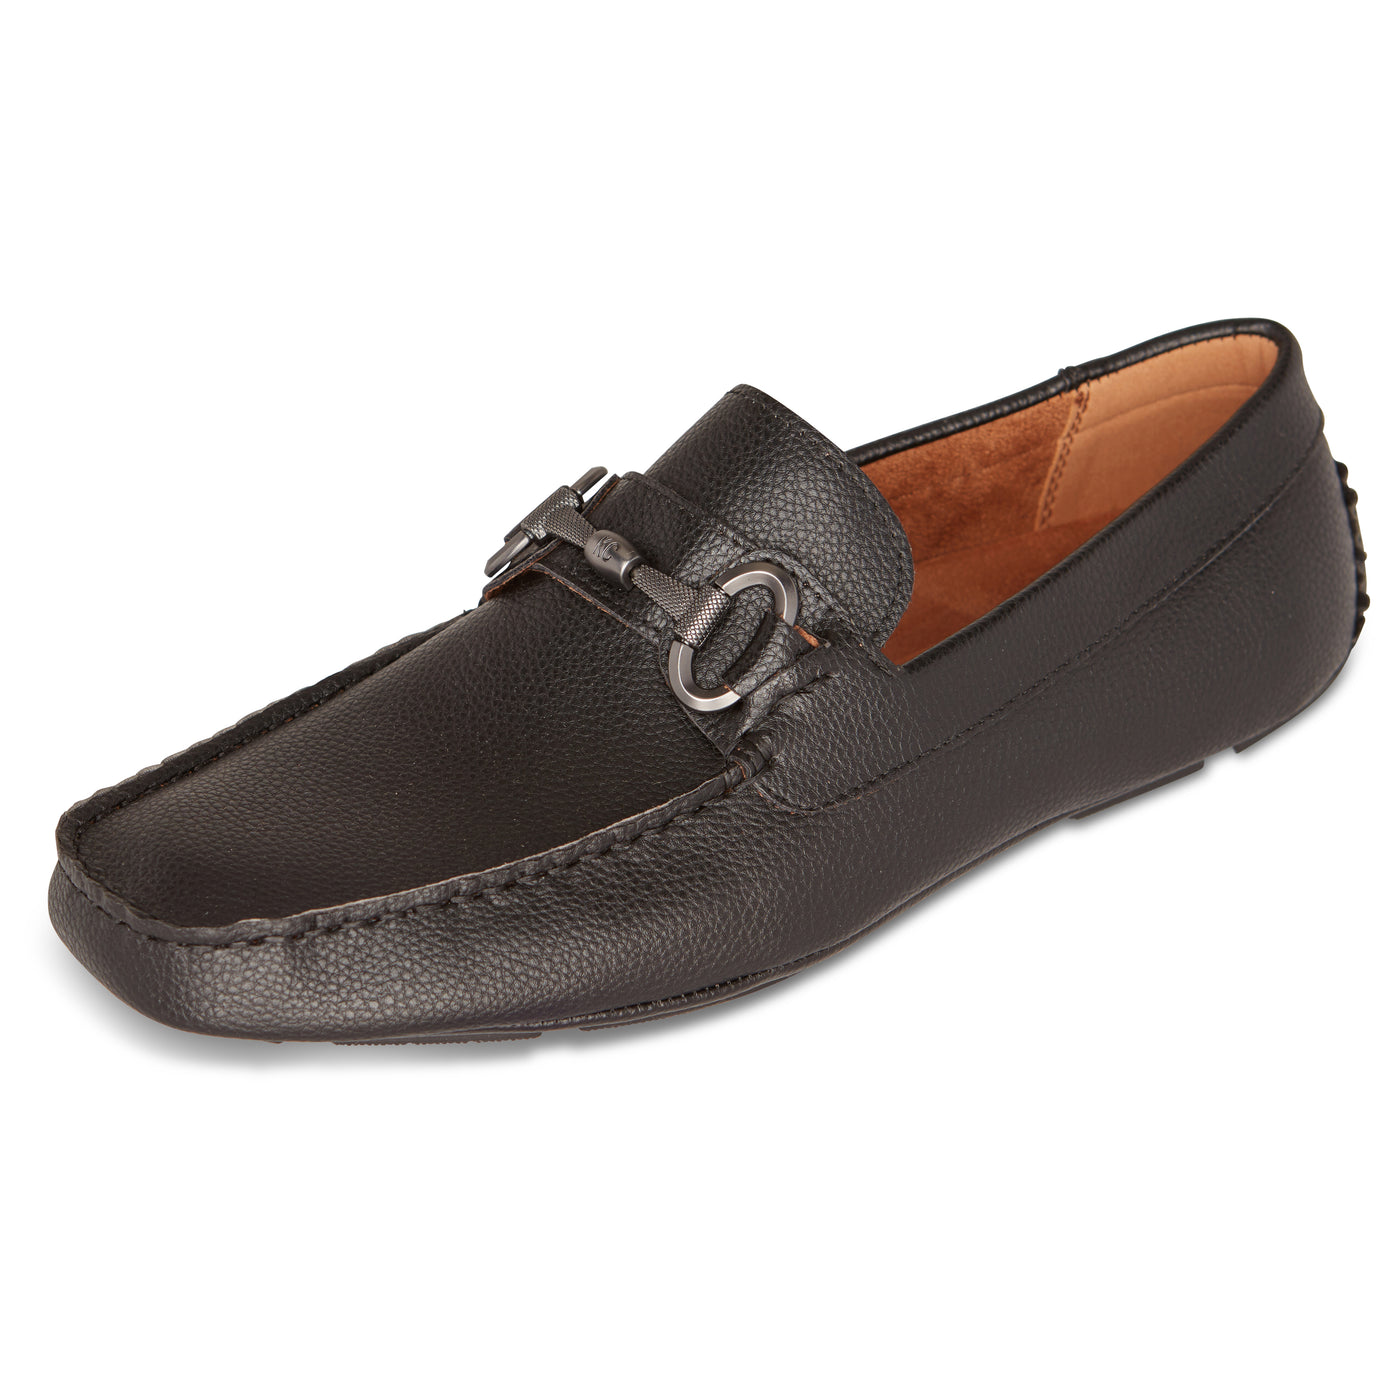 Kenneth Cole Reaction Men's Dawson Bit Driver Style Loafer